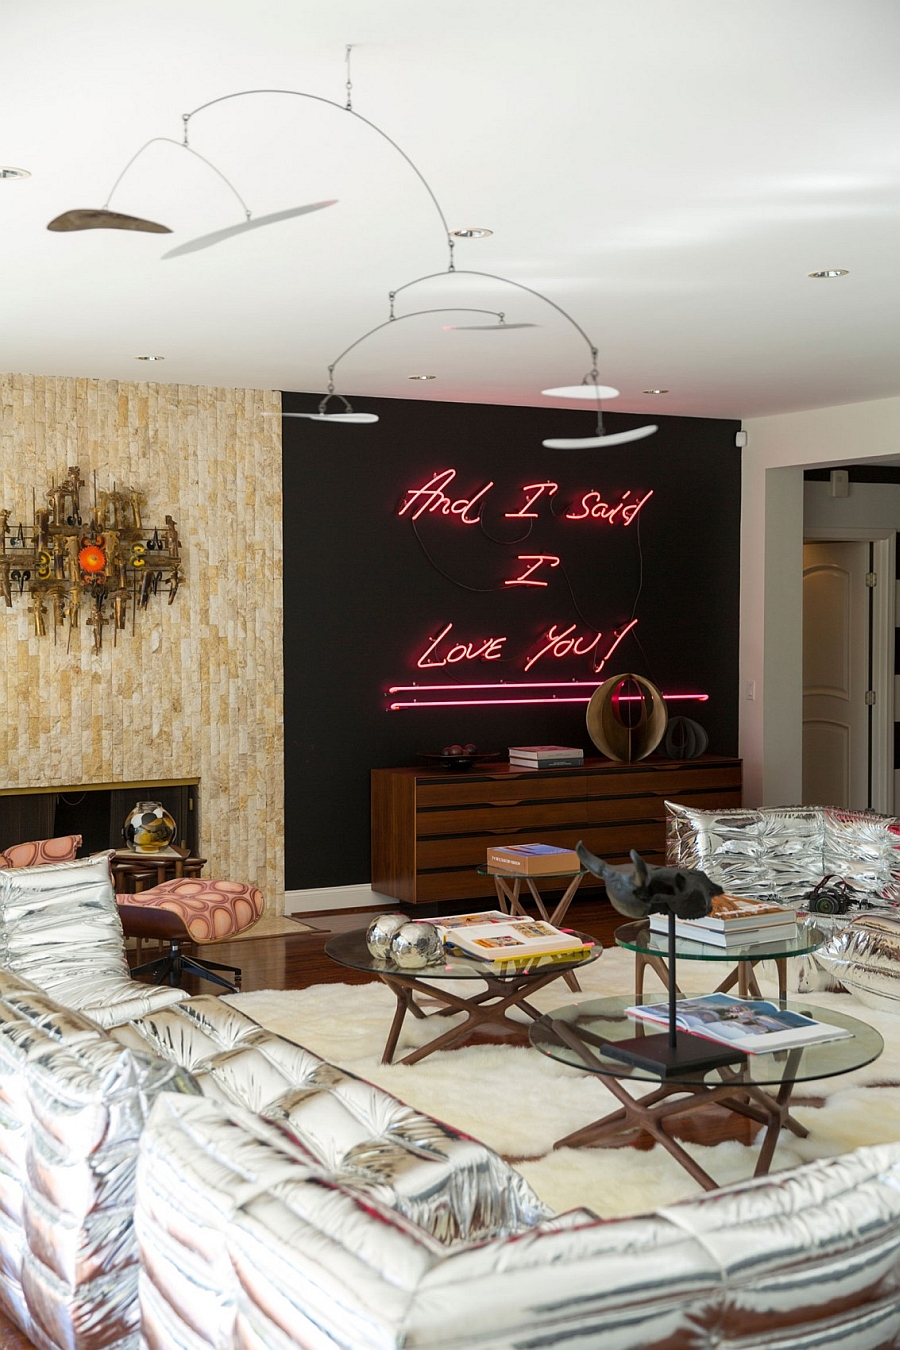 Brilliant neon sign on the living room wall steals the show